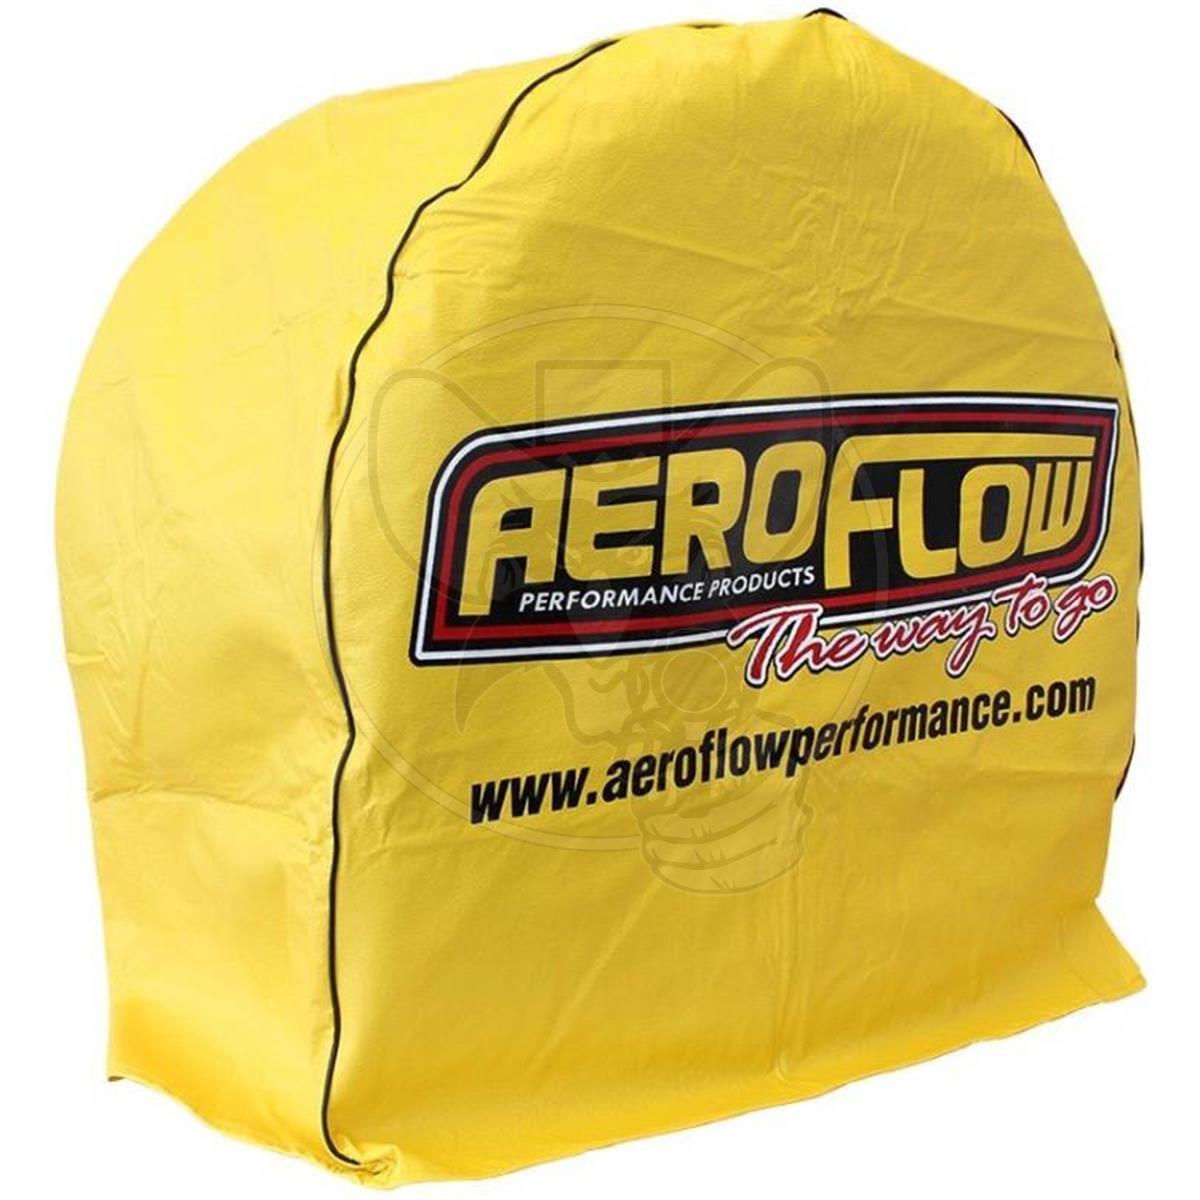 AEROFLOW TYRE COVER UP TO 36" DIAMETER SOLD INDIVIDUALLY